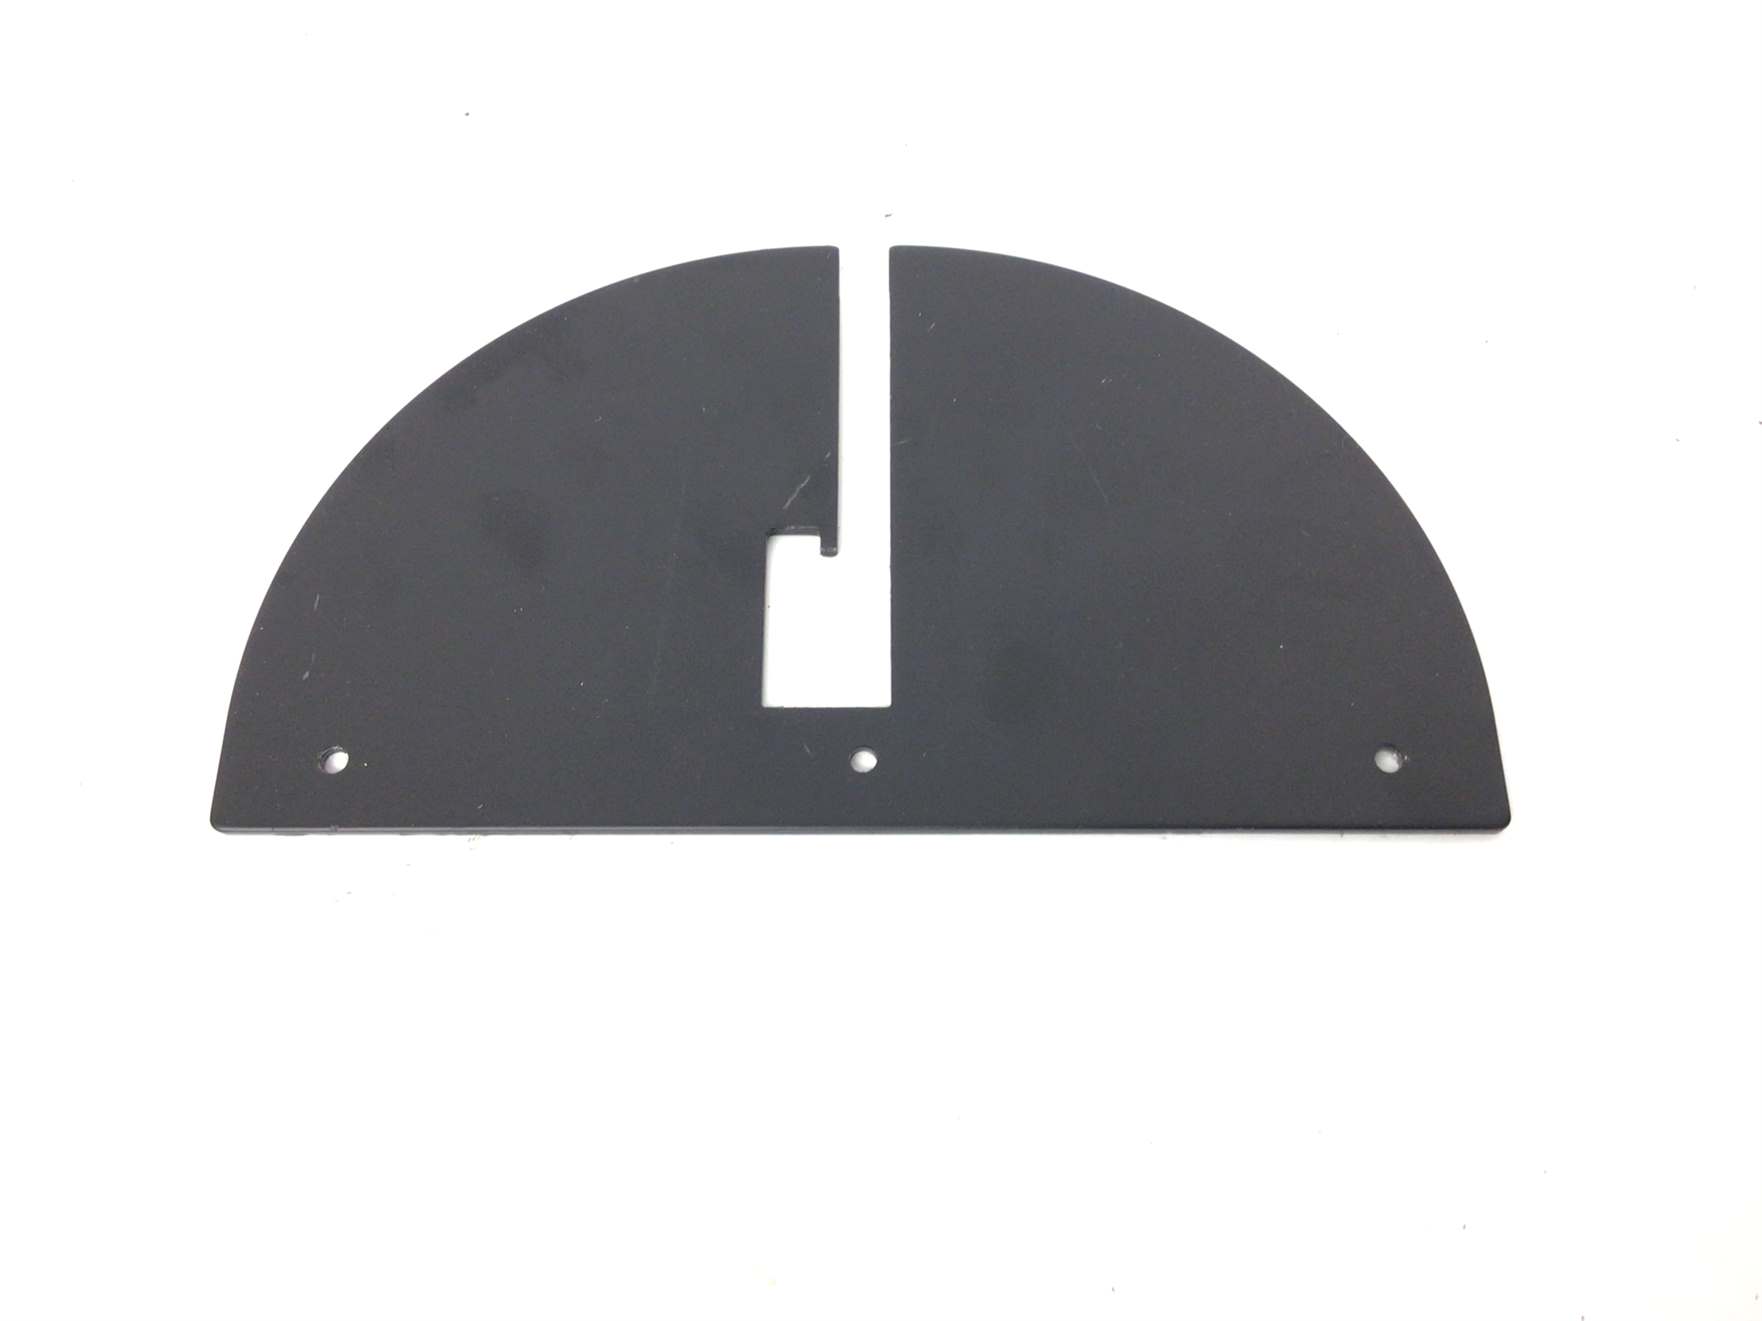 Treadel Lock Lever Release Plate Guide (Used)